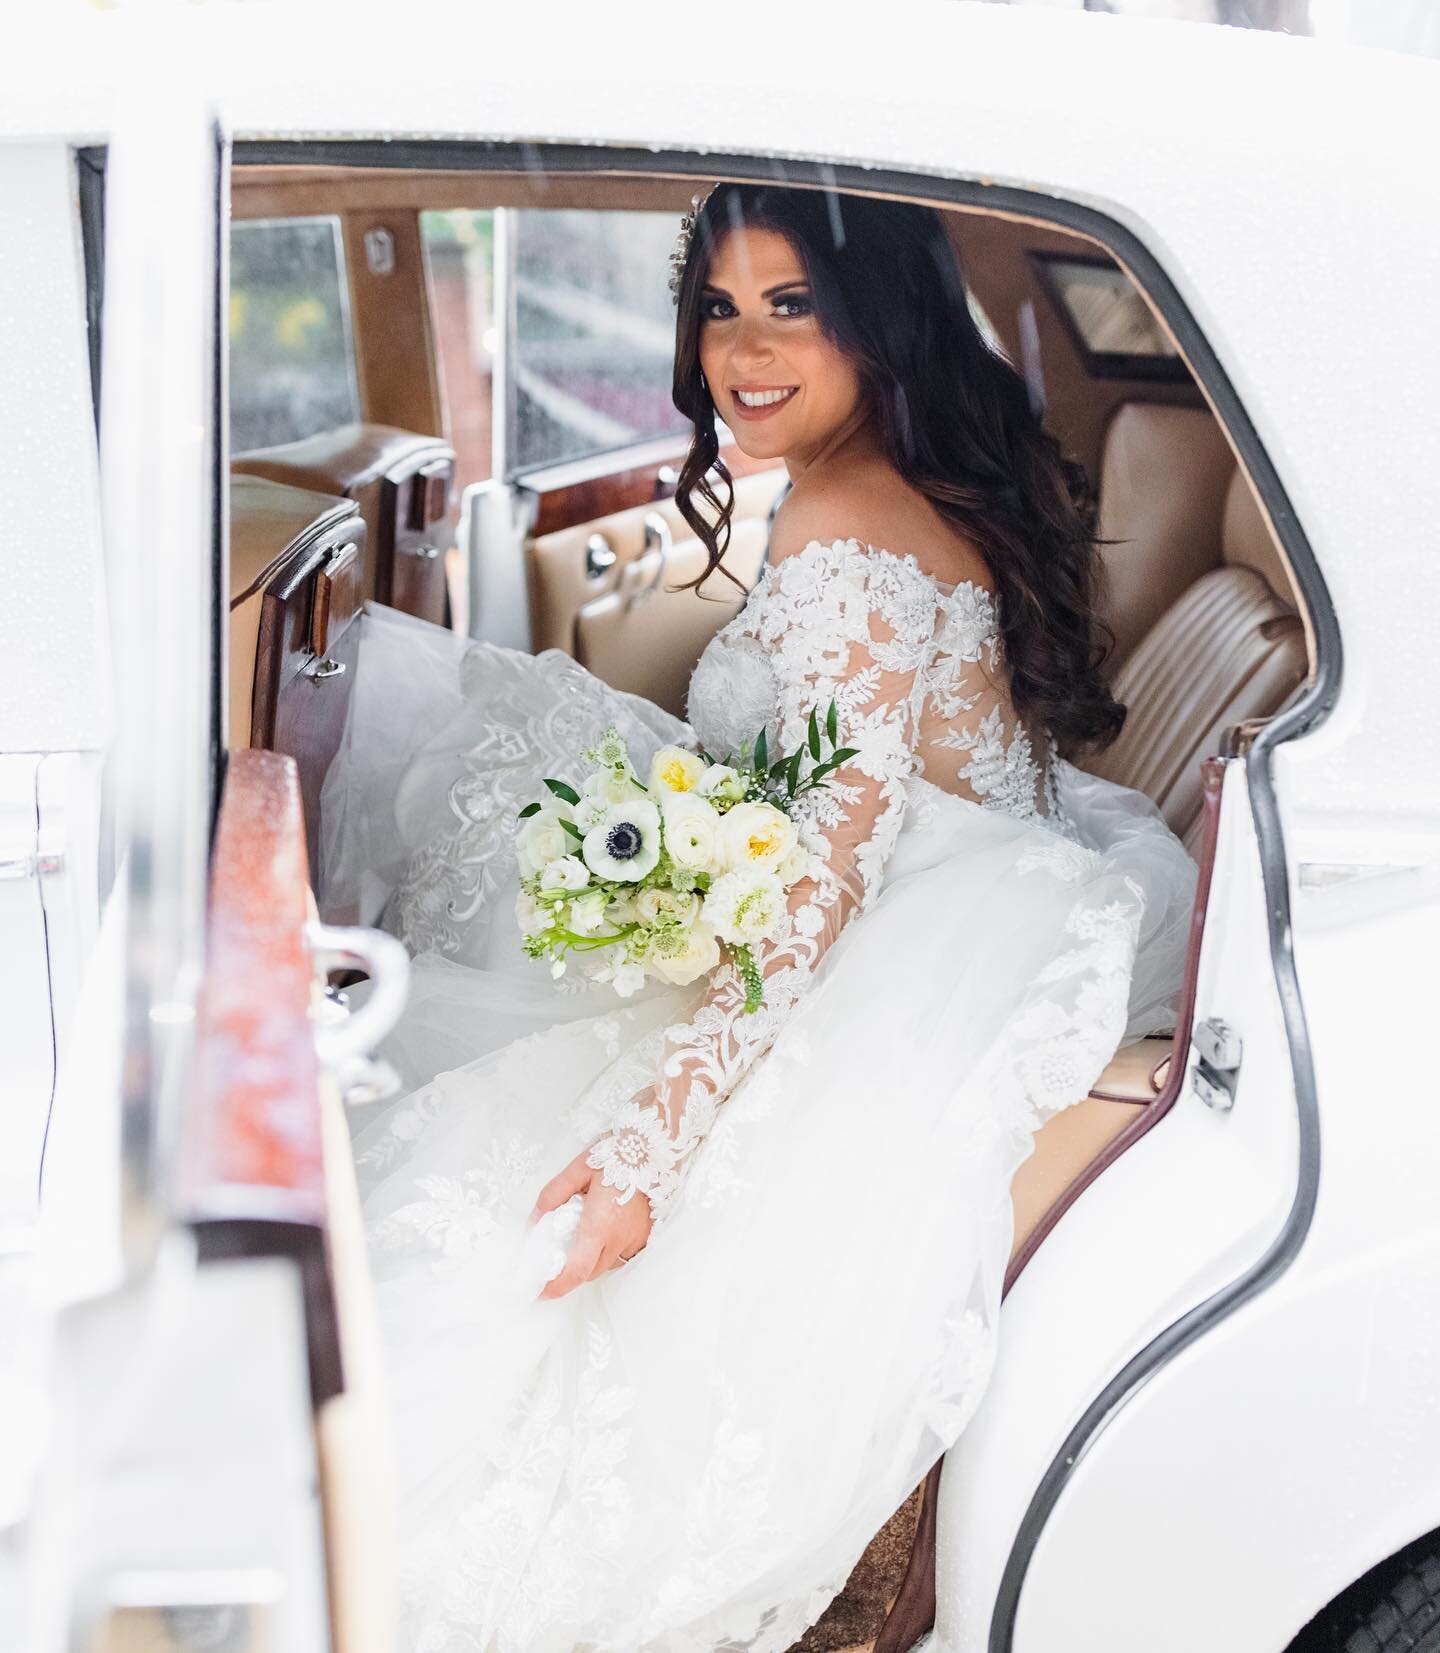 What being on the way to marry your best friend looks like 🤩✨💍 love this photo by @redfieldphoto featuring our beautiful KJB bride @itsaliciaann !

#weddingday #bride #brideandgroom #justmarried #phillybrideguide #bridalgowns